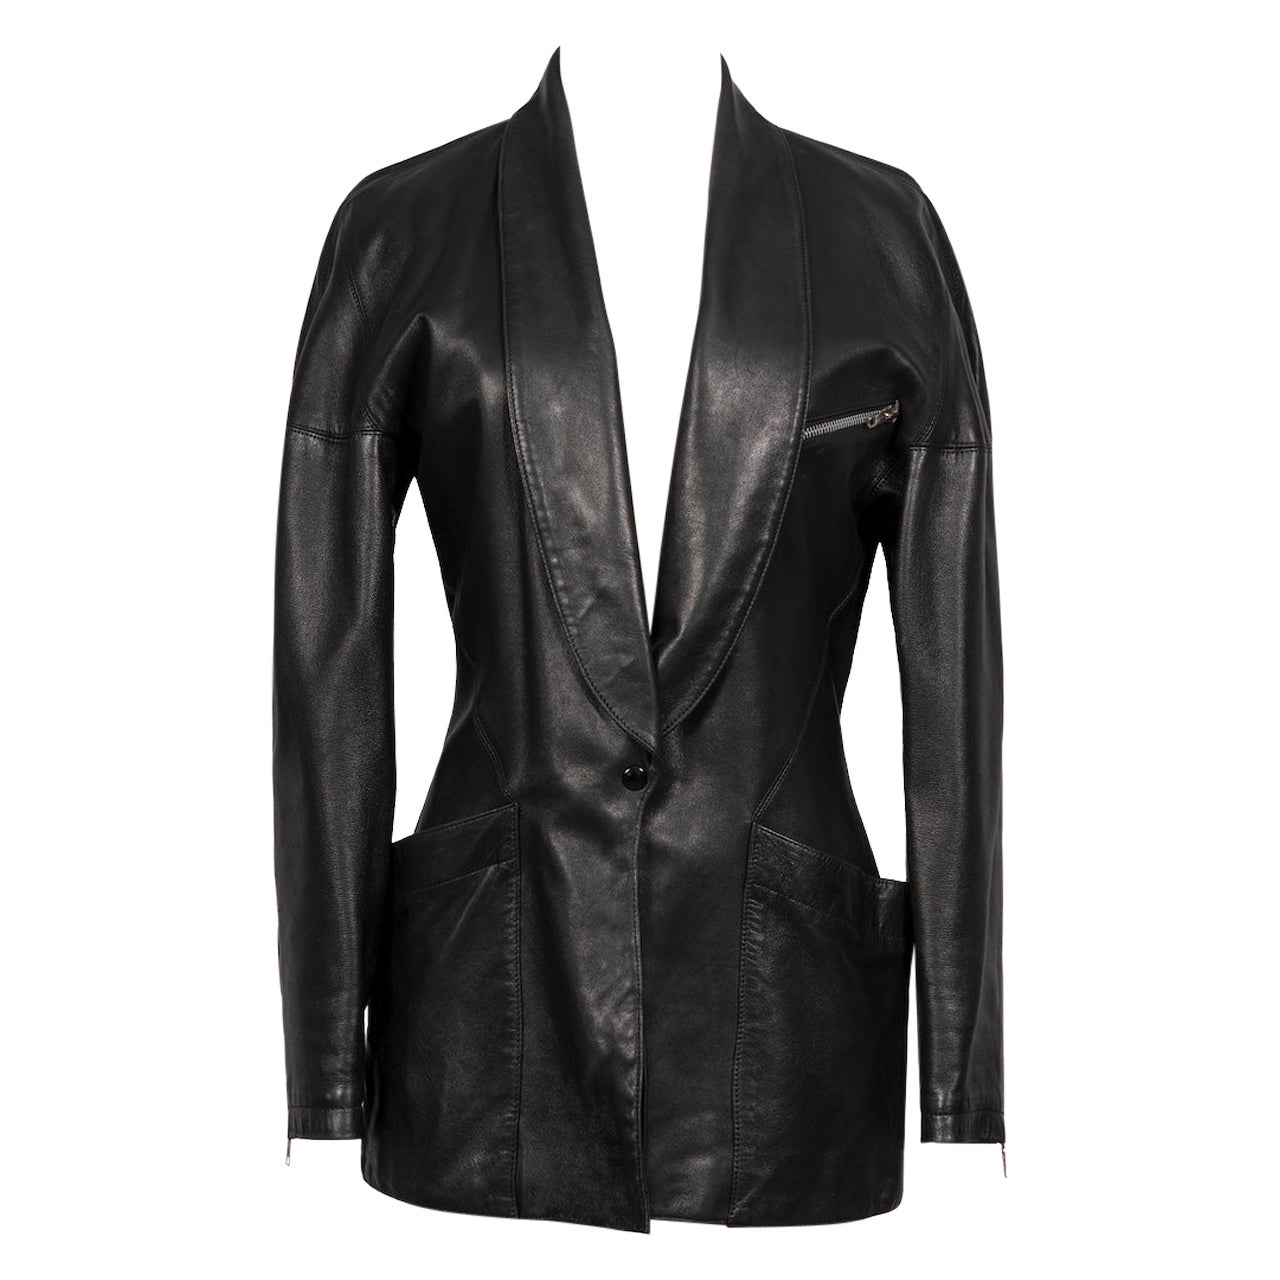 A/W 1982 Azzedine ALAÏA First Ready-To-Wear Collection Black Leather Jacket For Sale